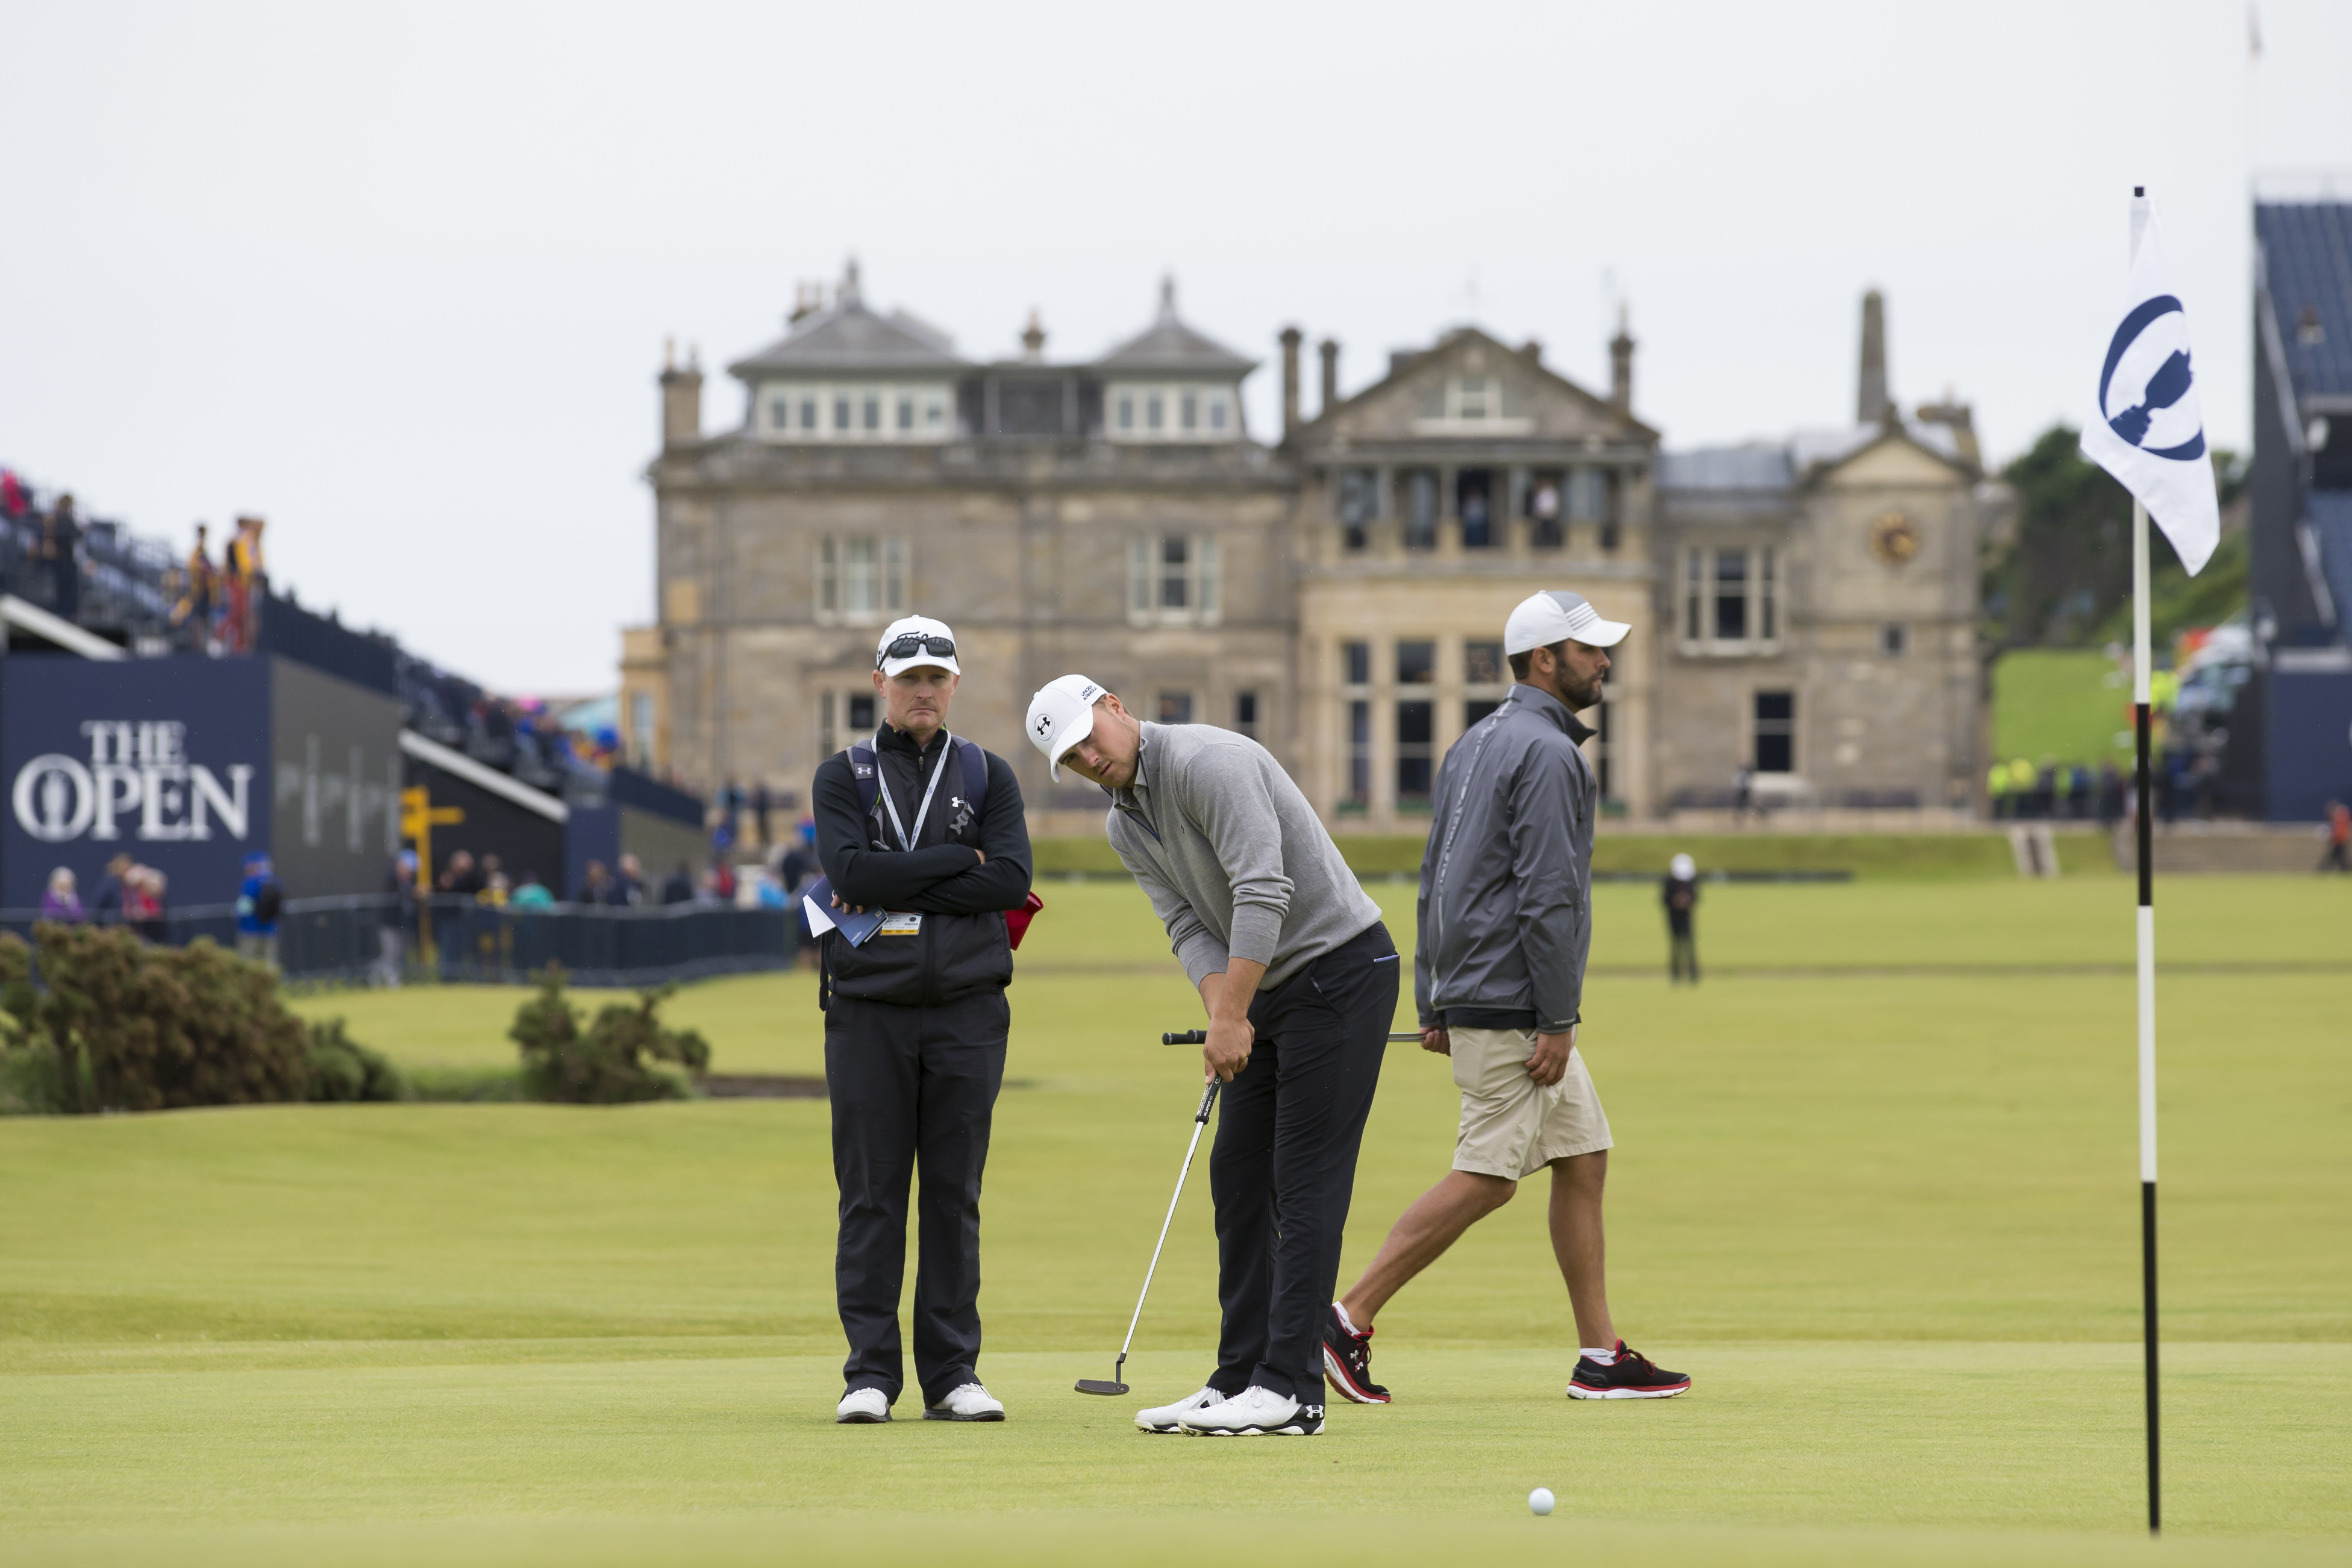 Jordan Spieth: What Are His Chances At St. Andrews?